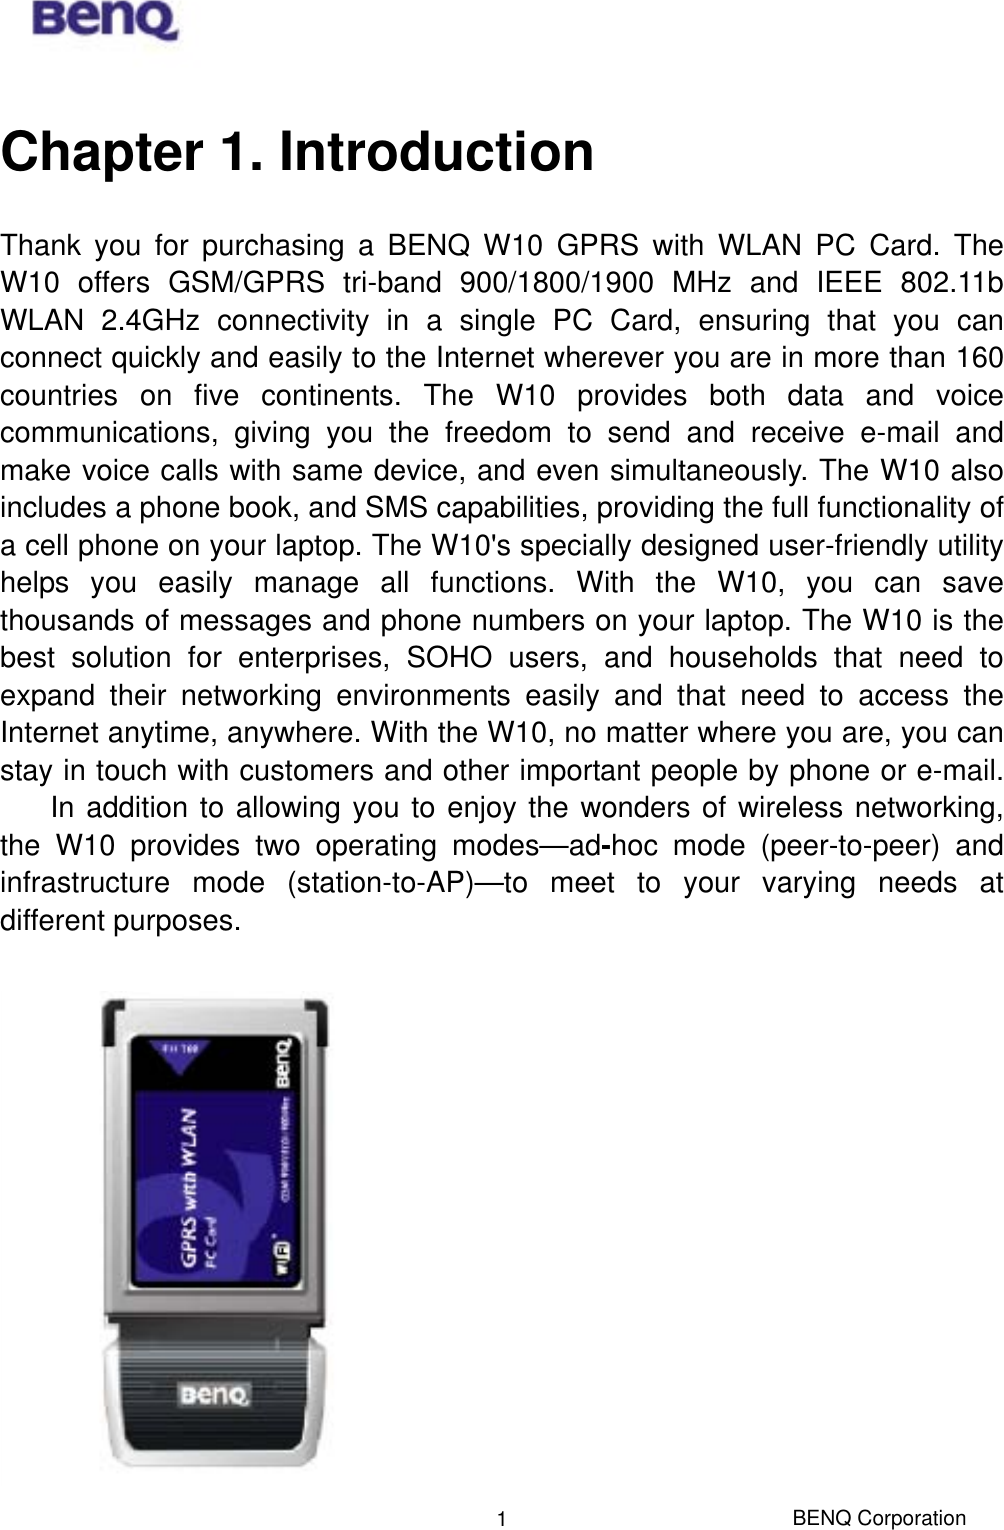  Chapter 1. Introduction Thank you for purchasing a BENQ W10 GPRS with WLAN PC Card. The W10 offers GSM/GPRS tri-band 900/1800/1900 MHz and IEEE 802.11b WLAN 2.4GHz connectivity in a single PC Card, ensuring that you can connect quickly and easily to the Internet wherever you are in more than 160 countries on five continents. The W10 provides both data and voice communications, giving you the freedom to send and receive e-mail and make voice calls with same device, and even simultaneously. The W10 also includes a phone book, and SMS capabilities, providing the full functionality of a cell phone on your laptop. The W10&apos;s specially designed user-friendly utility helps you easily manage all functions. With the W10, you can save thousands of messages and phone numbers on your laptop. The W10 is the best solution for enterprises, SOHO users, and households that need to expand their networking environments easily and that need to access the Internet anytime, anywhere. With the W10, no matter where you are, you can stay in touch with customers and other important people by phone or e-mail.  In addition to allowing you to enjoy the wonders of wireless networking, the W10 provides two operating modes—ad-hoc mode (peer-to-peer) and infrastructure mode (station-to-AP)—to meet to your varying needs at different purposes.   BENQ Corporation 1